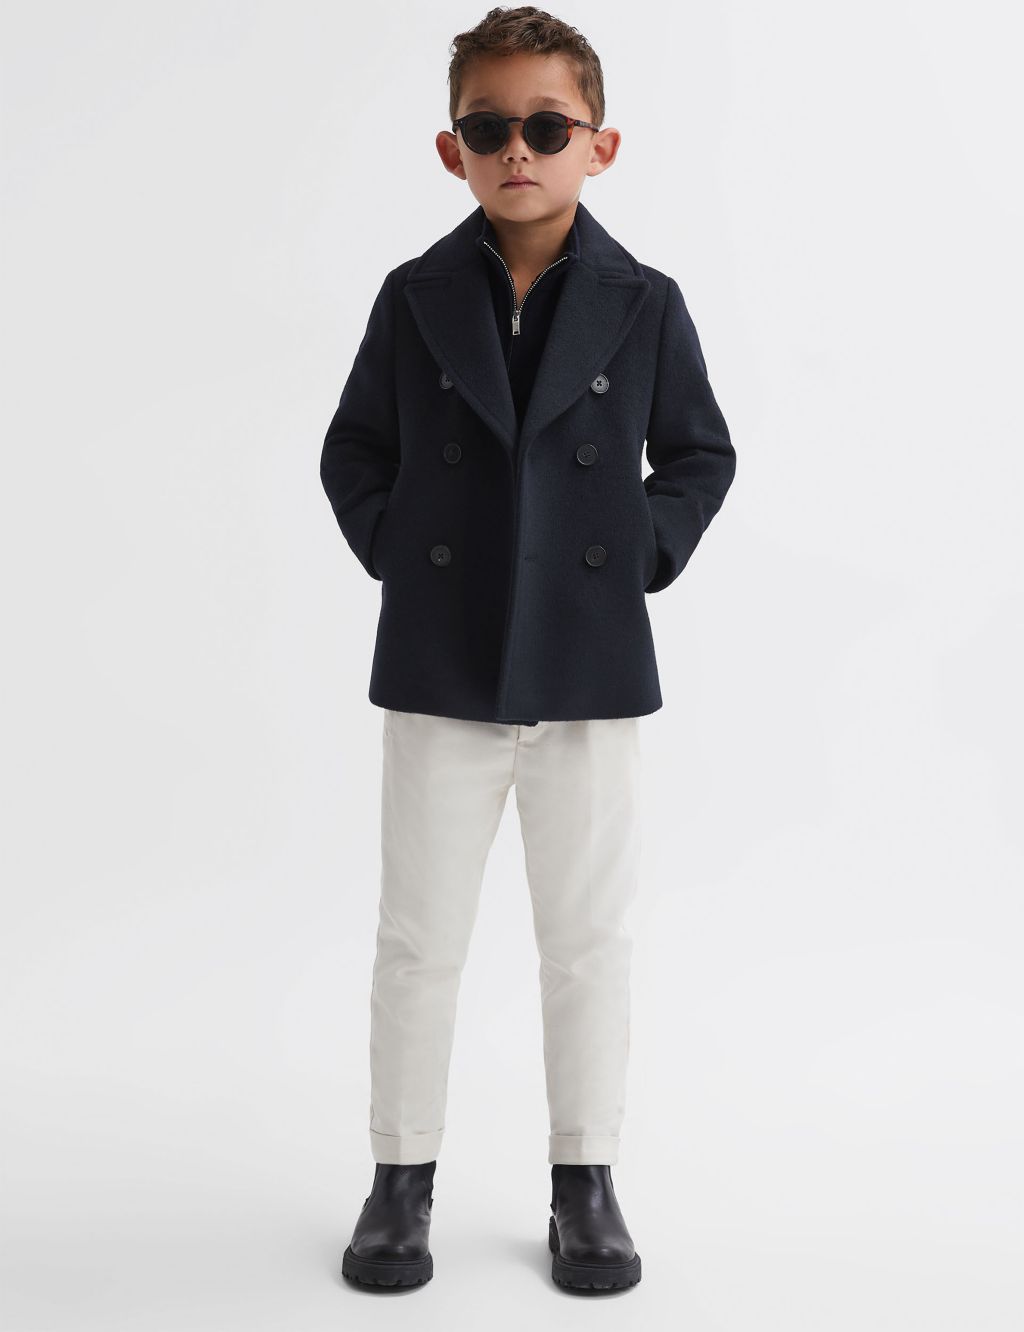 Wool Blend Double Breasted Jacket (4-14 Yrs) image 3